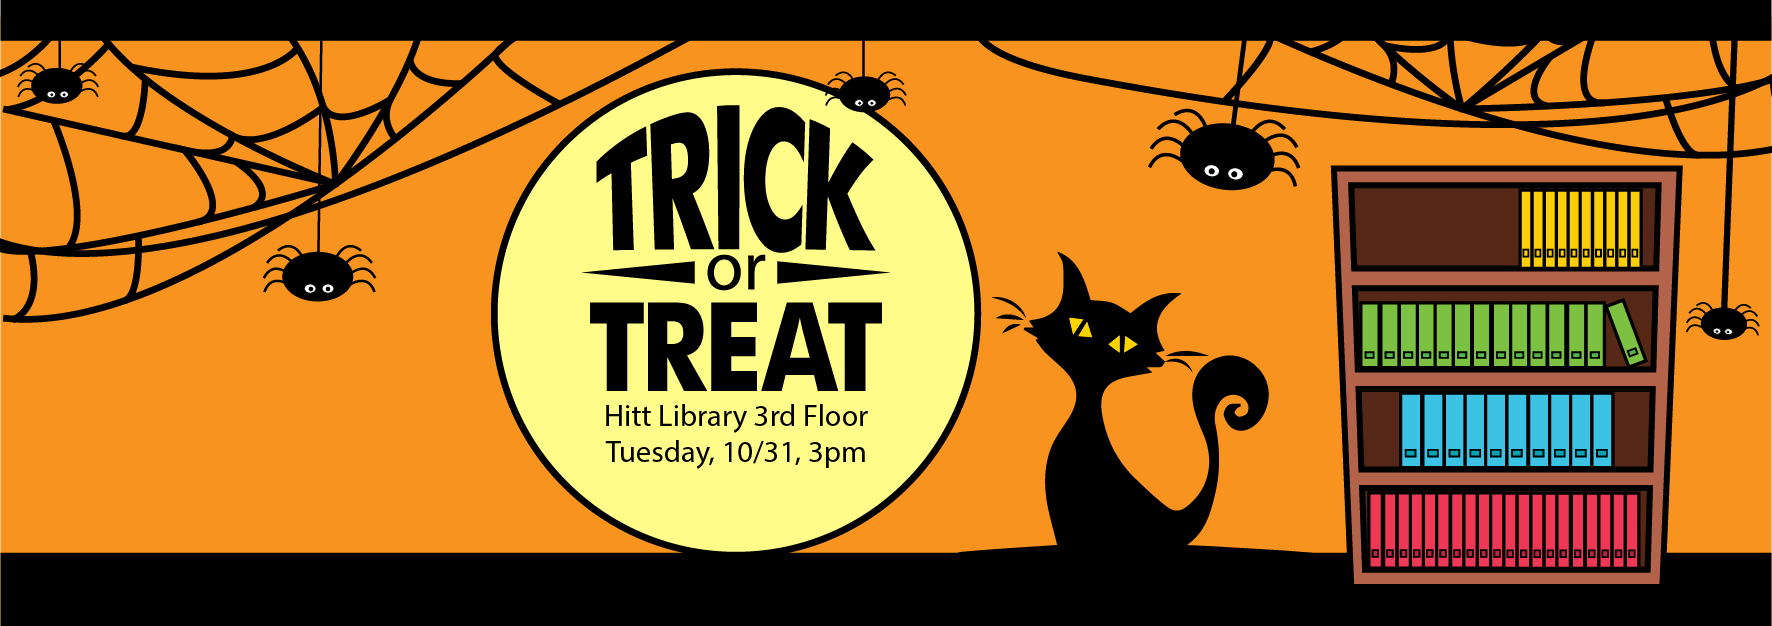 Trick or Treat, Hitt Library 3rd floor, Tuesday, 10/31, 3pm